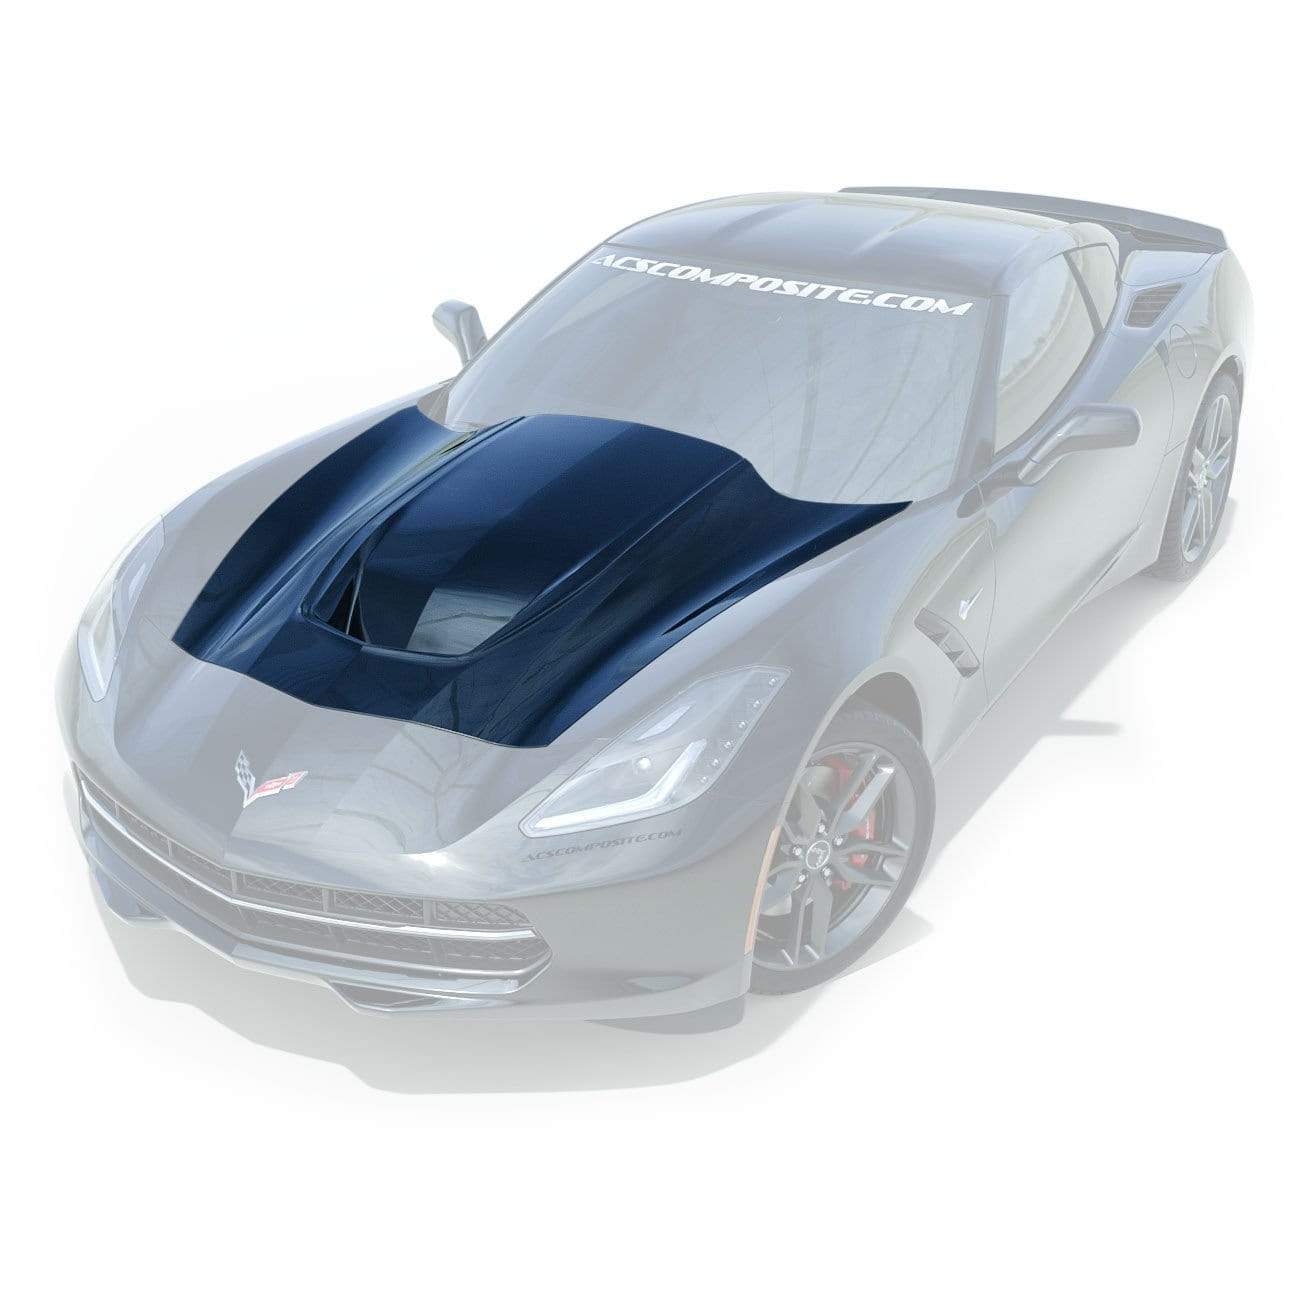 ACS Composite Zero7 Extractor FRP Hood for C7 Corvette (45-4-009) - Black mesh grill insert, taller cowl, and optional polycarbonate window.